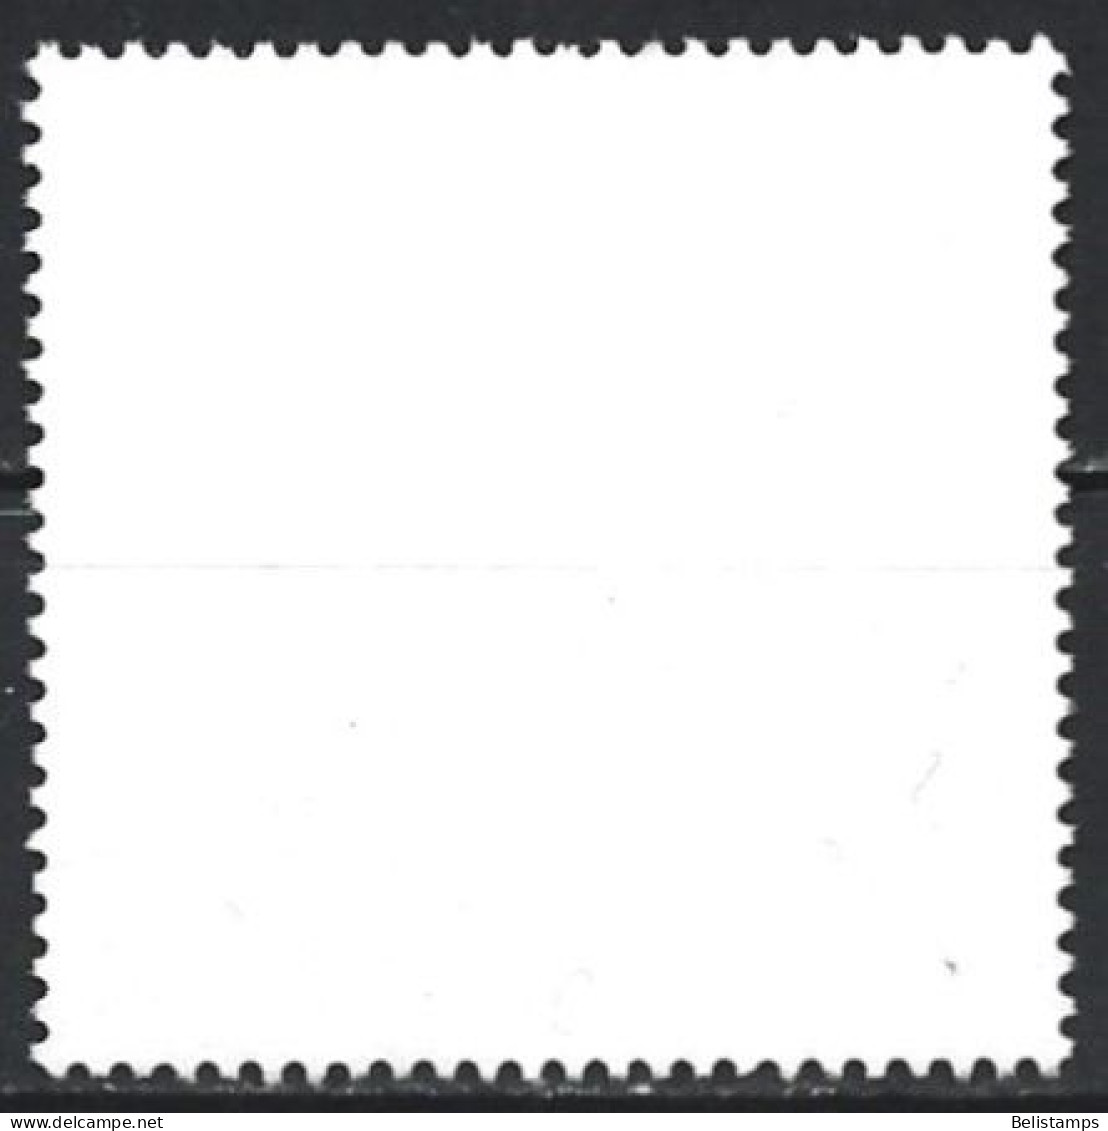 Germany 2010. Scott #2586 (U) For Children (Complete Issue) - Used Stamps